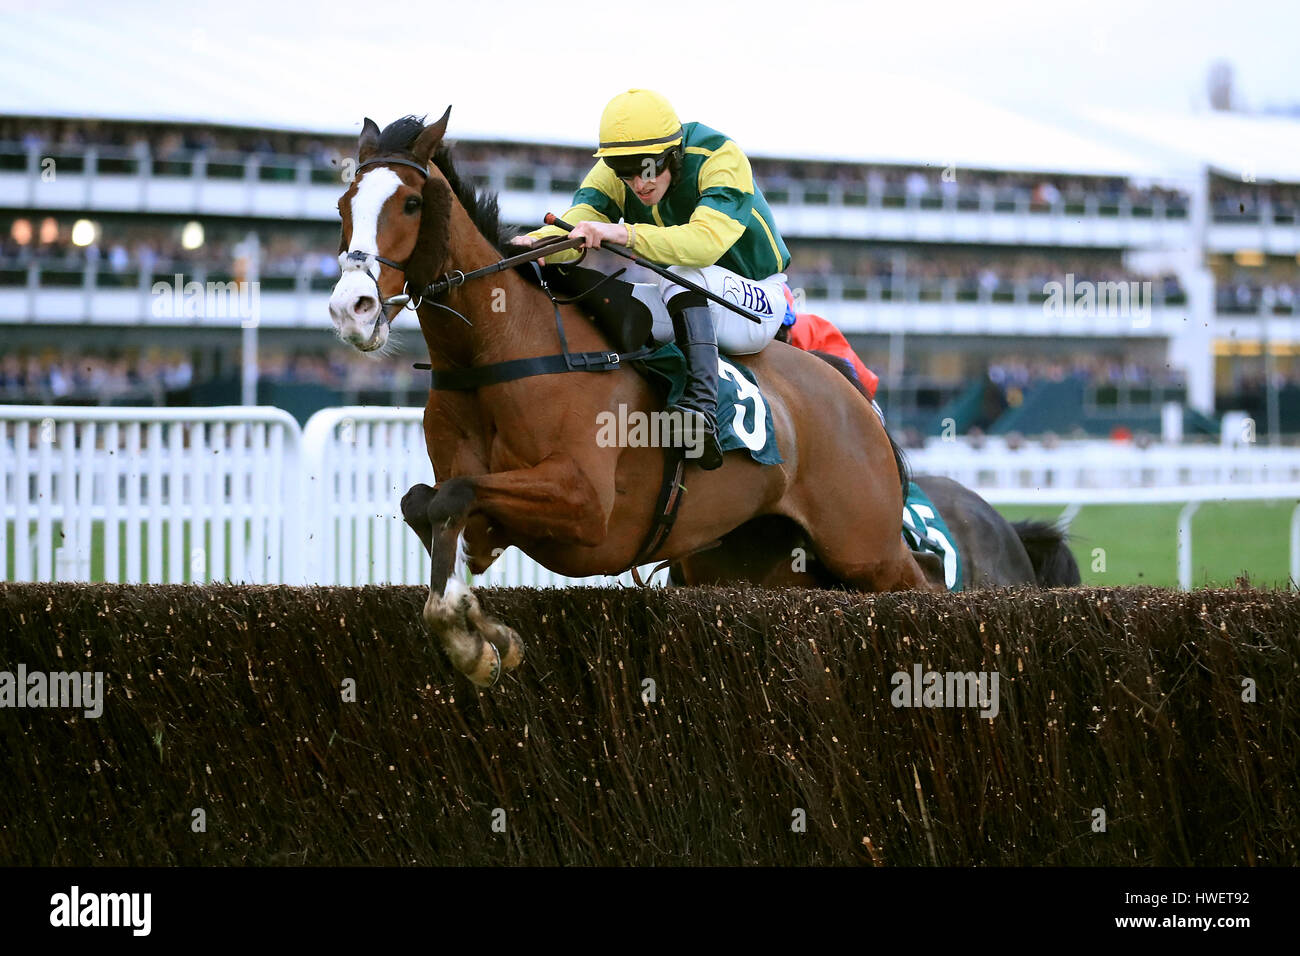 Jockey N George on Forgotten Gold during the Fulke Walwyn Kim Muir Challenge Cup Amateur Riders' Handicap Chase Stock Photo